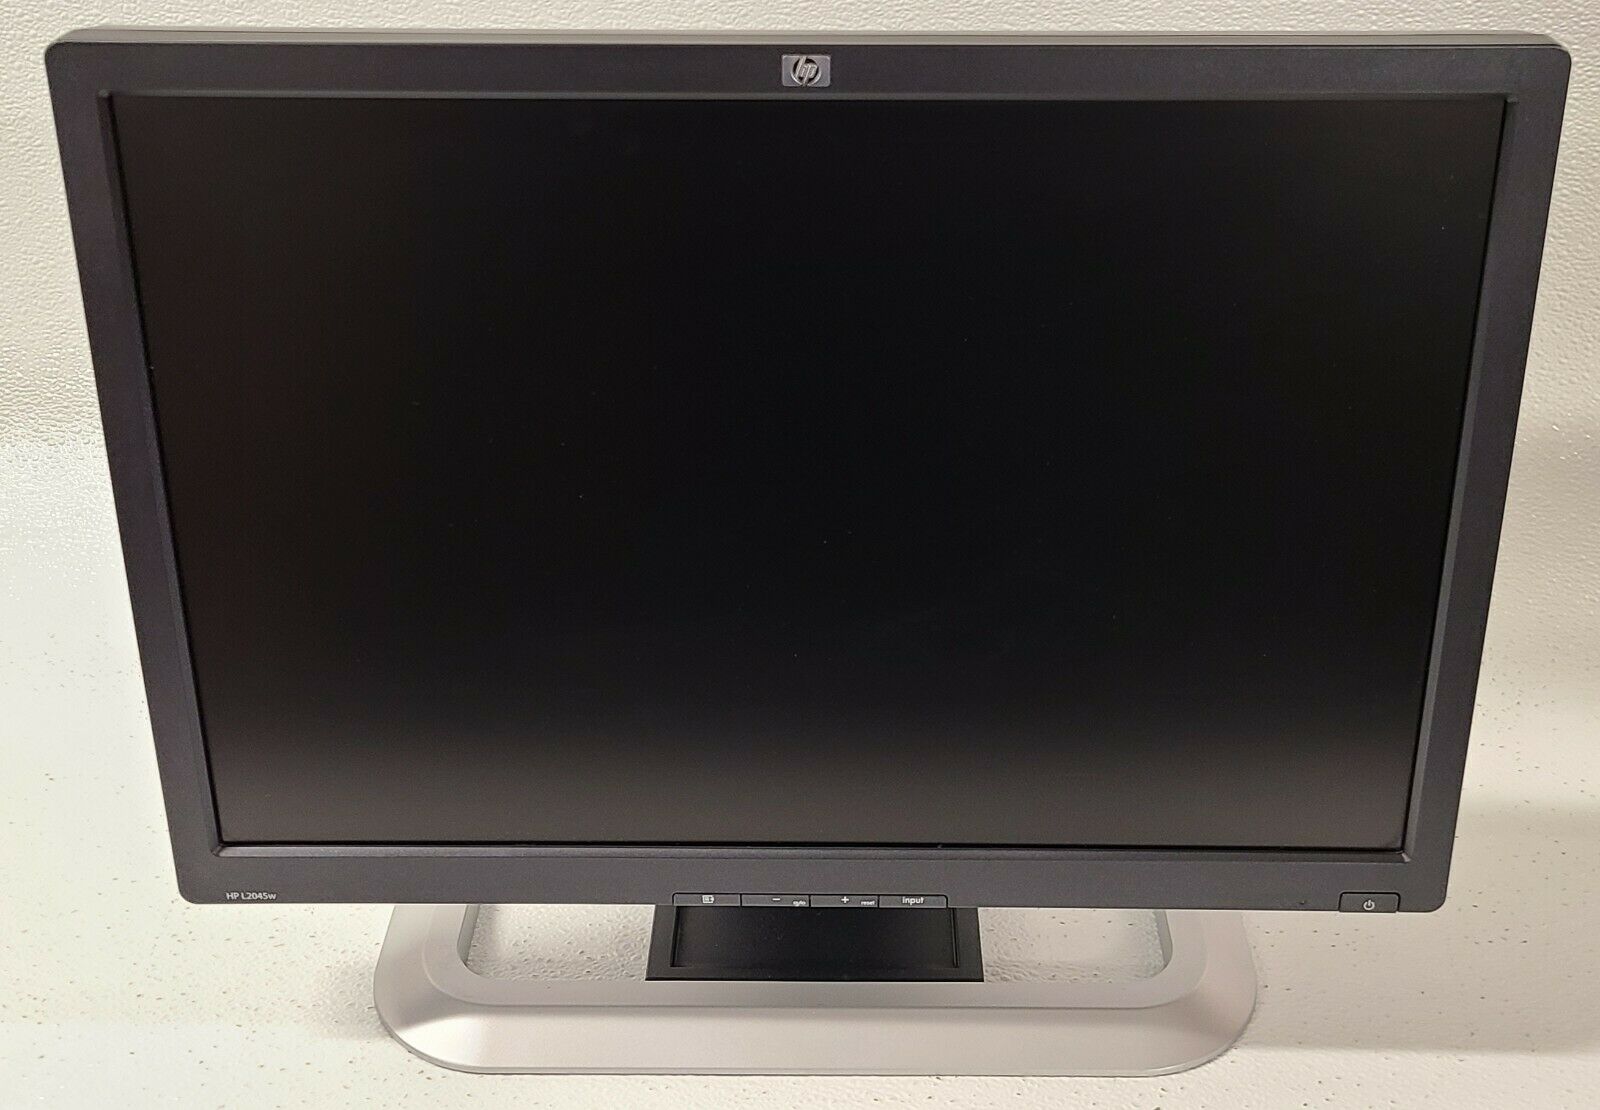 HP L2045w 20.1" Inch Wide Widescreen Flat Panel Screen LCD Monitor, Carbonite/Silver Renewed